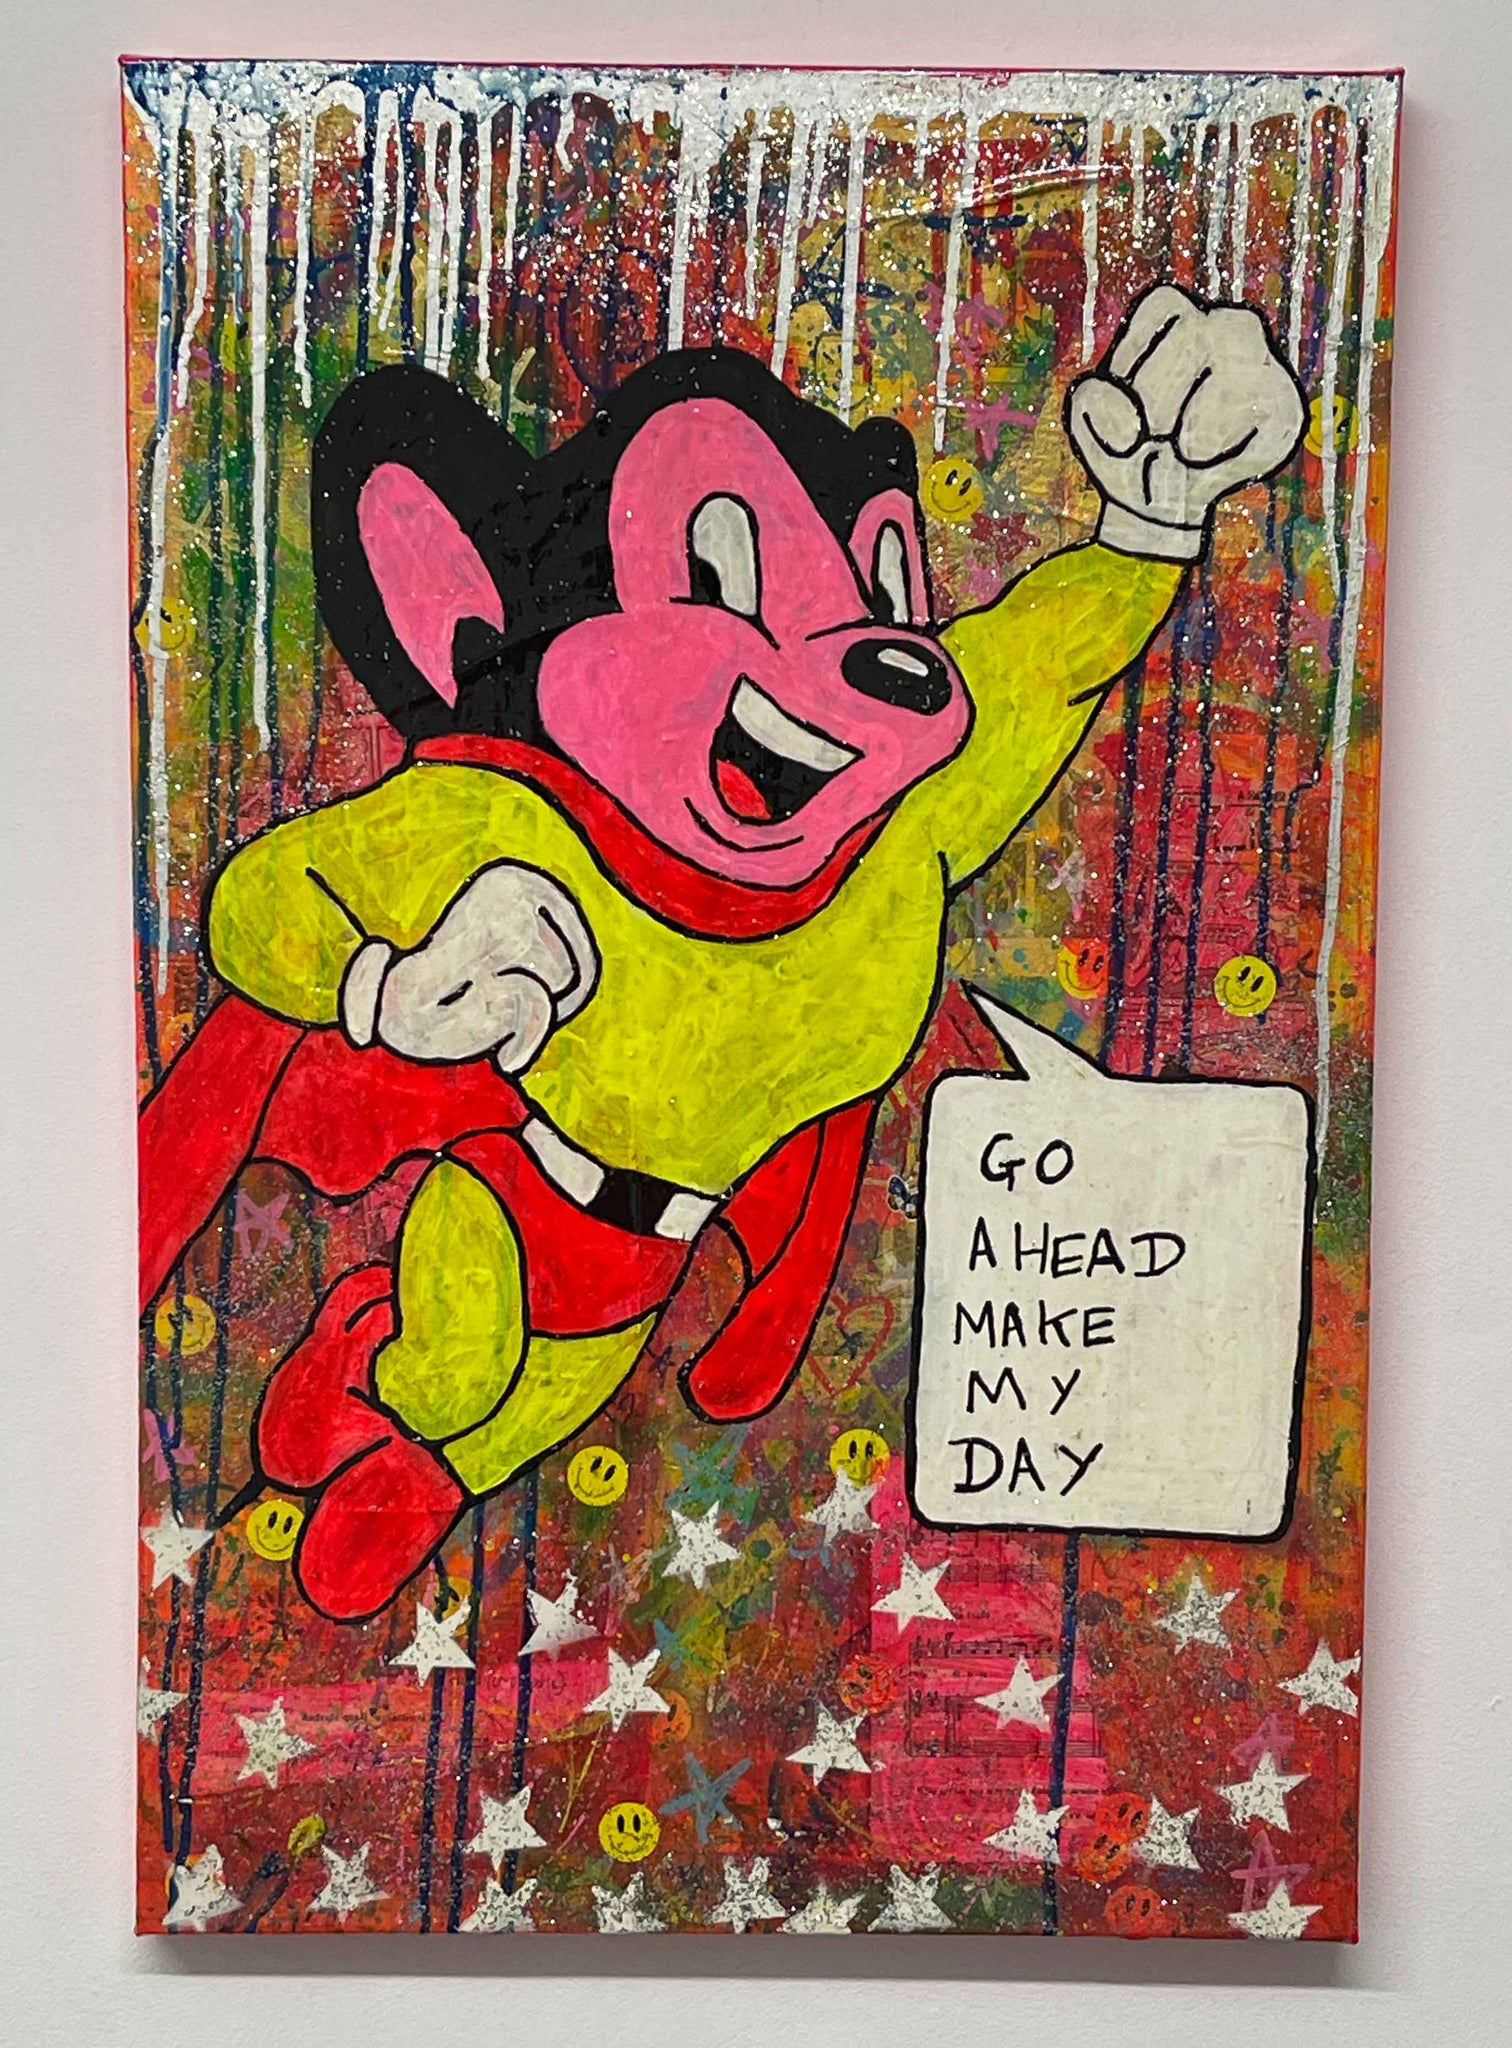 Make my Day Painting by Barrie J Davies 2022, Mixed media on Canvas, 76cm x 51cm, Unframed.